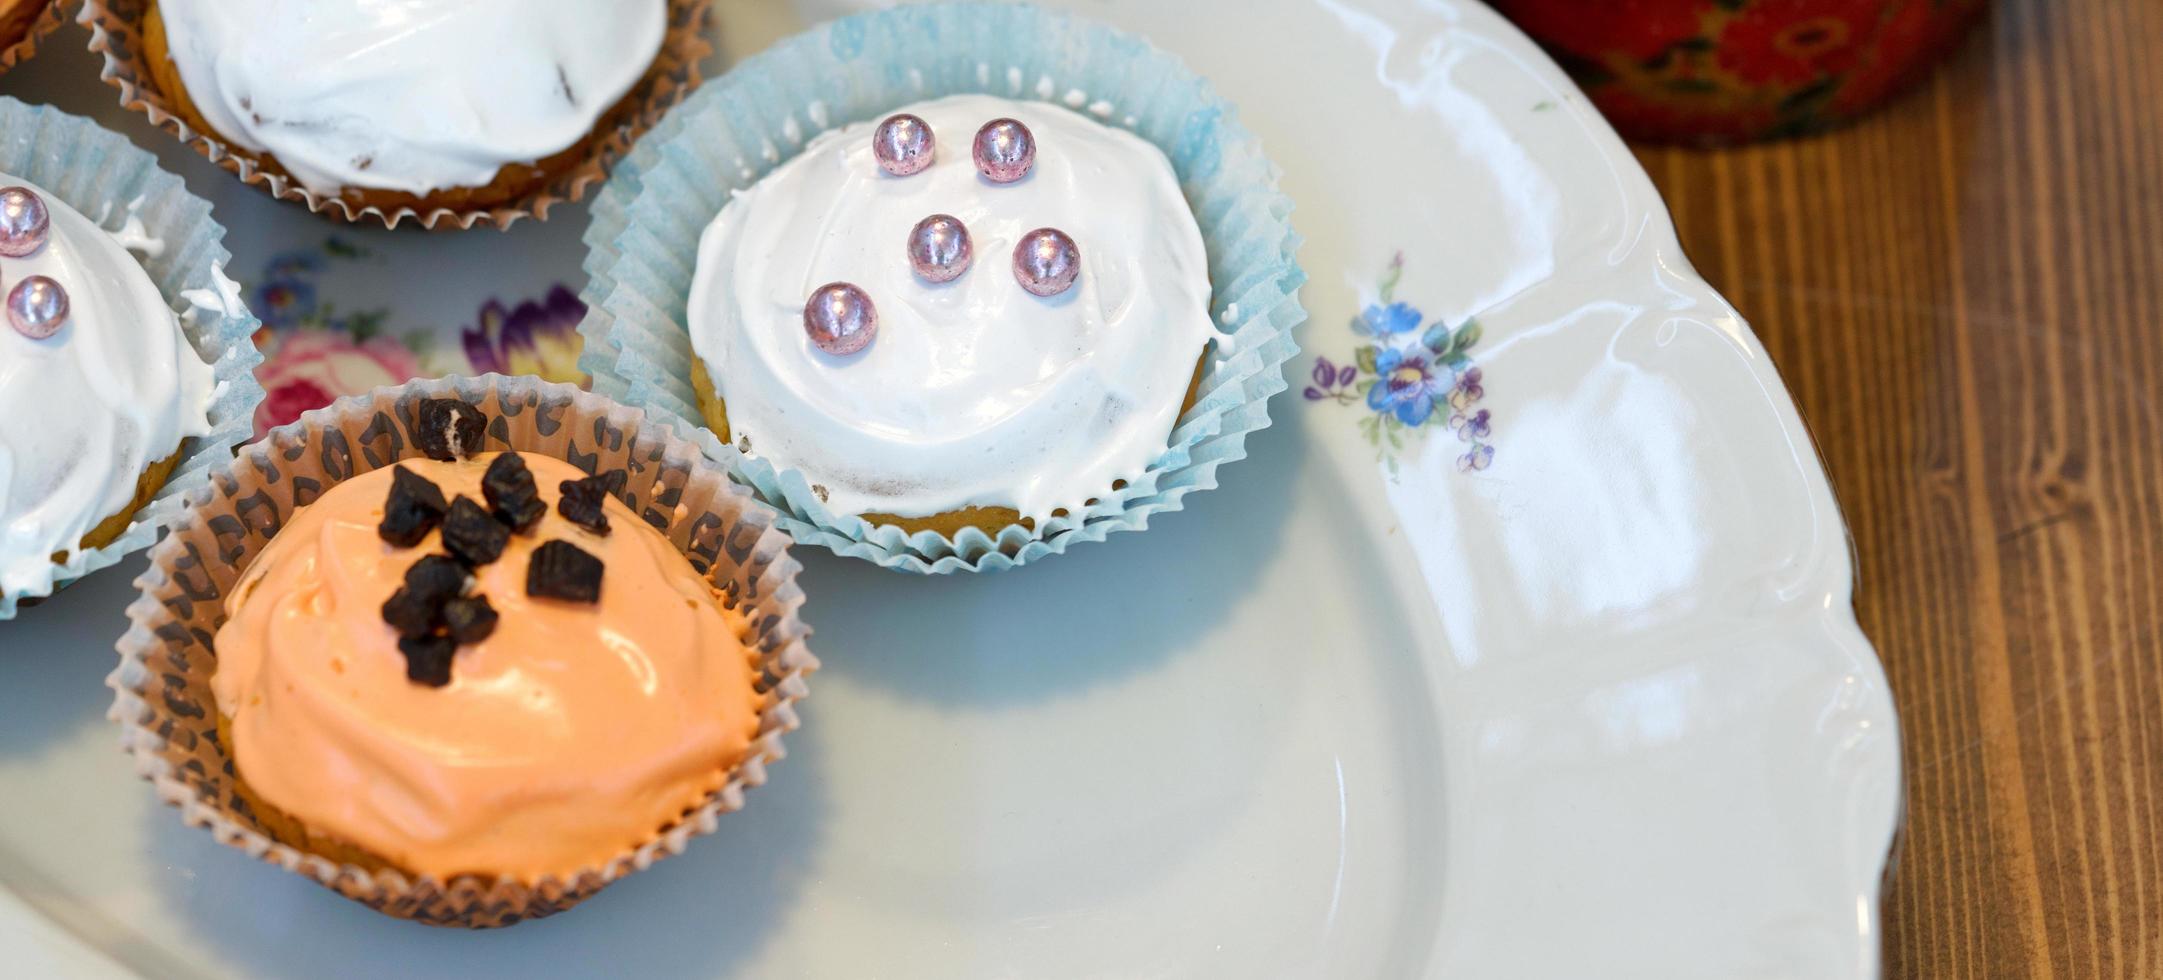 Cup Cakes on a Plate photo